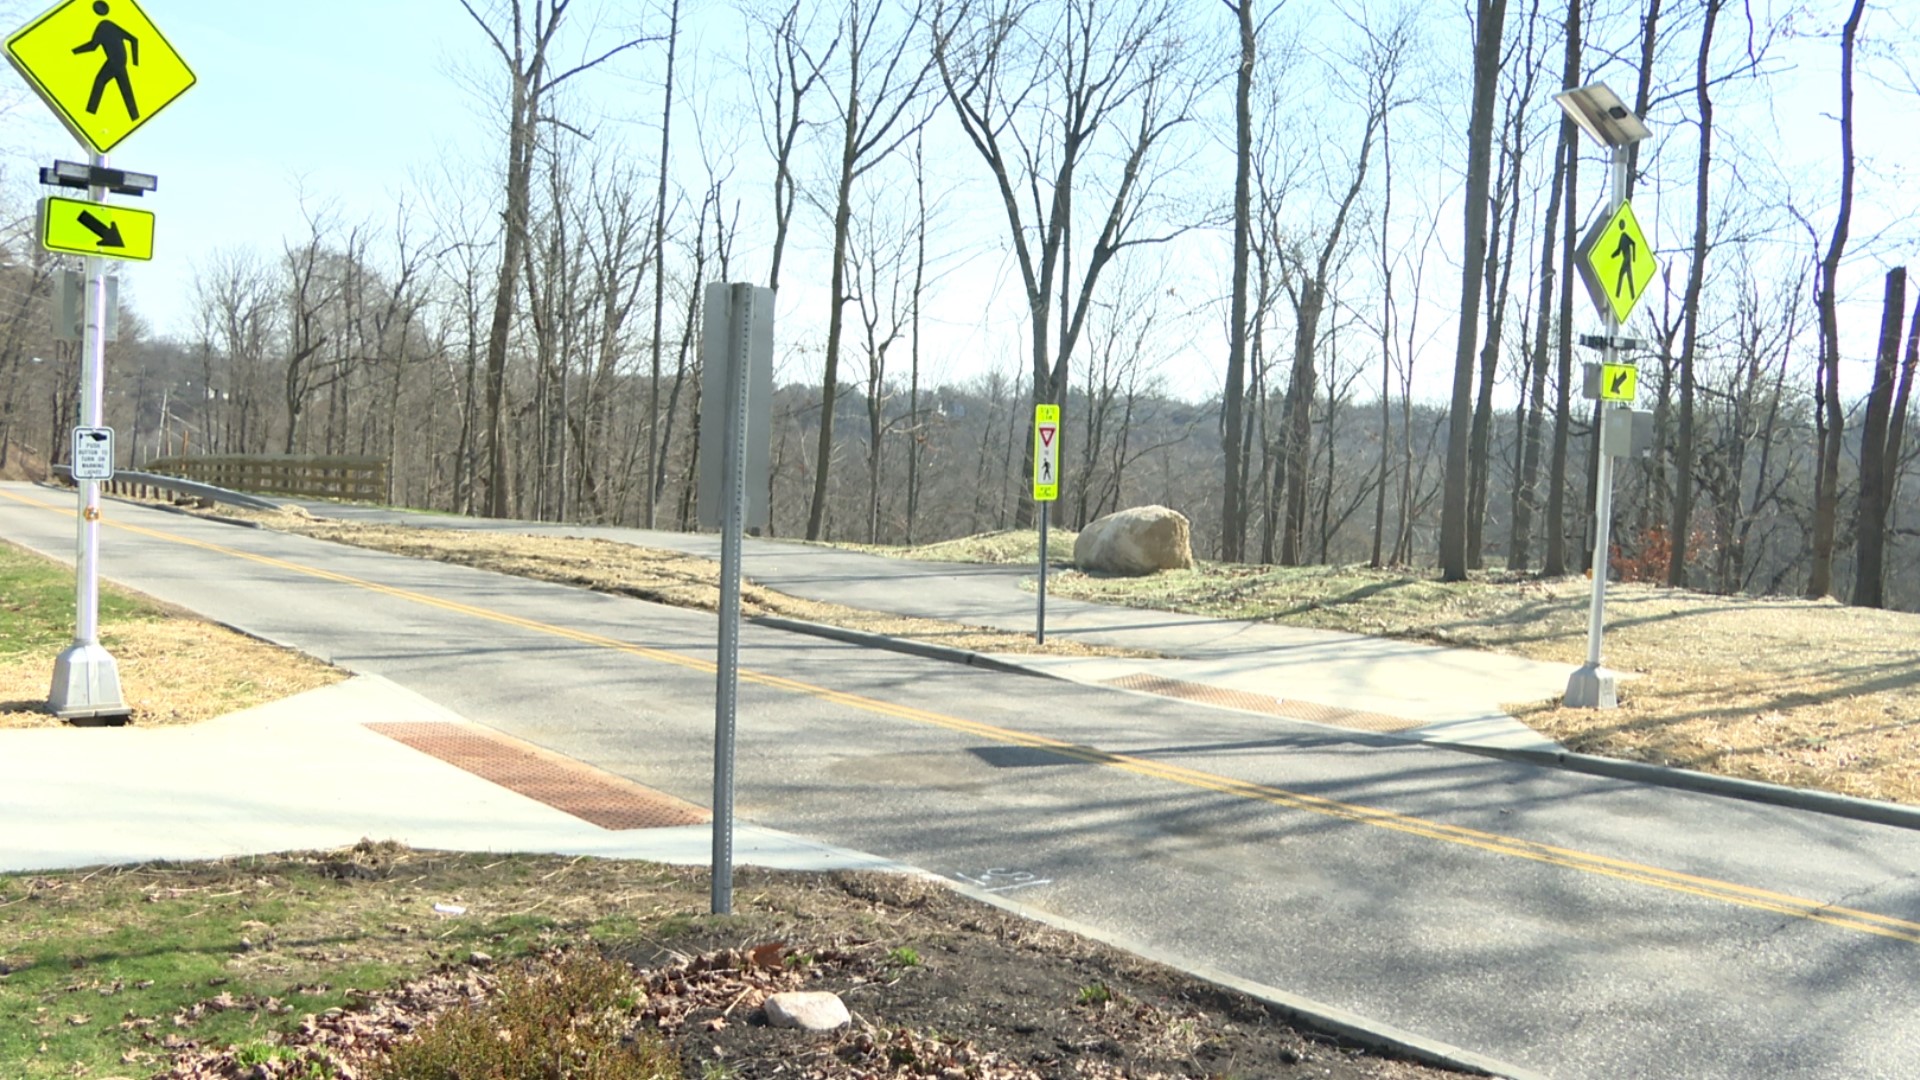 Drivers at the Mastick Road Connector Trail at Eaton Road must yield to pedestrians in the crosswalk.